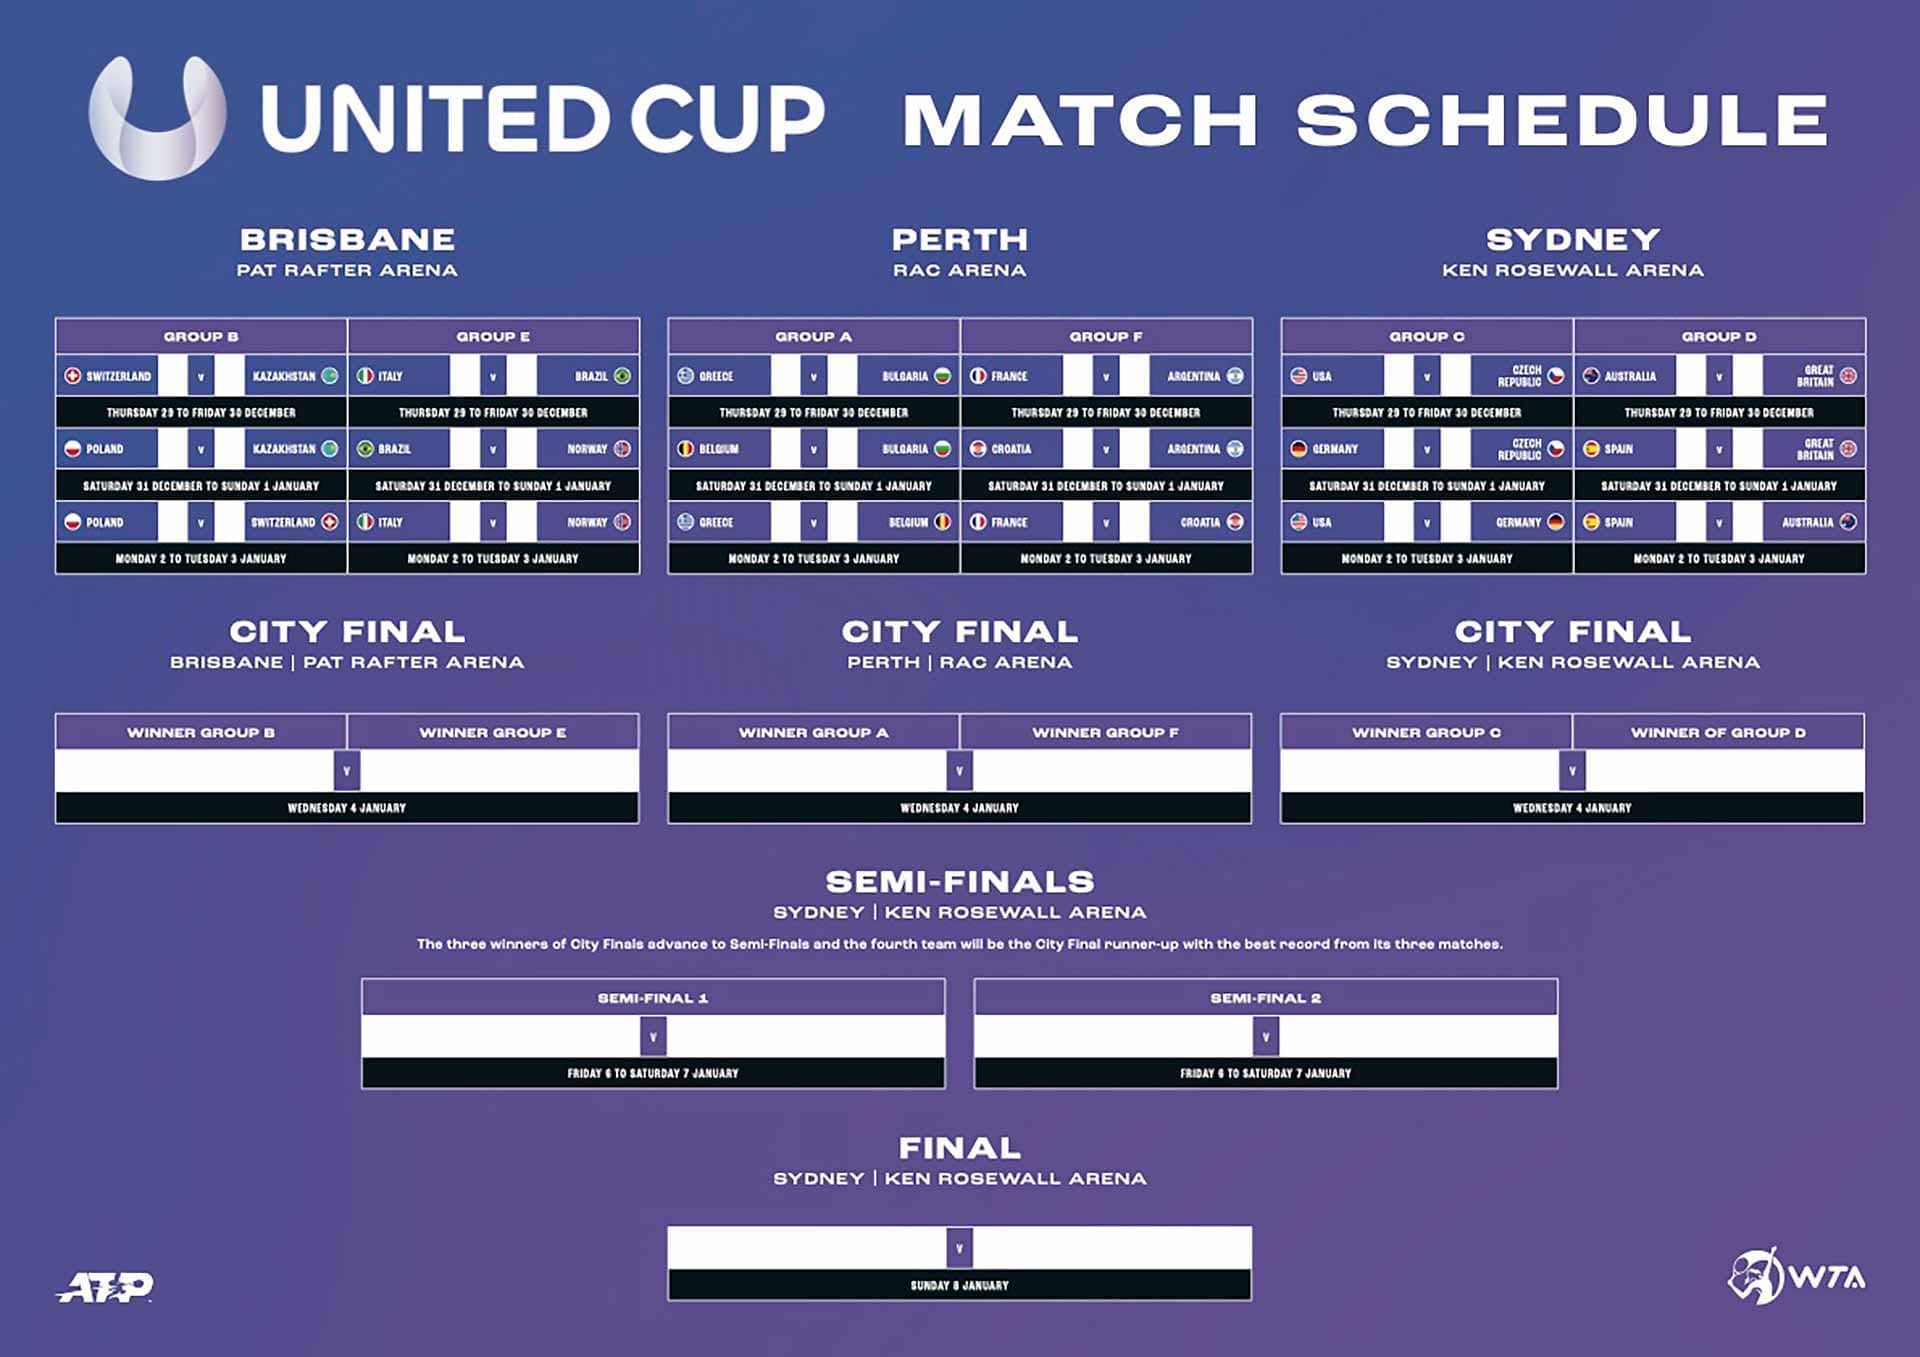 Pathway to United Cup title